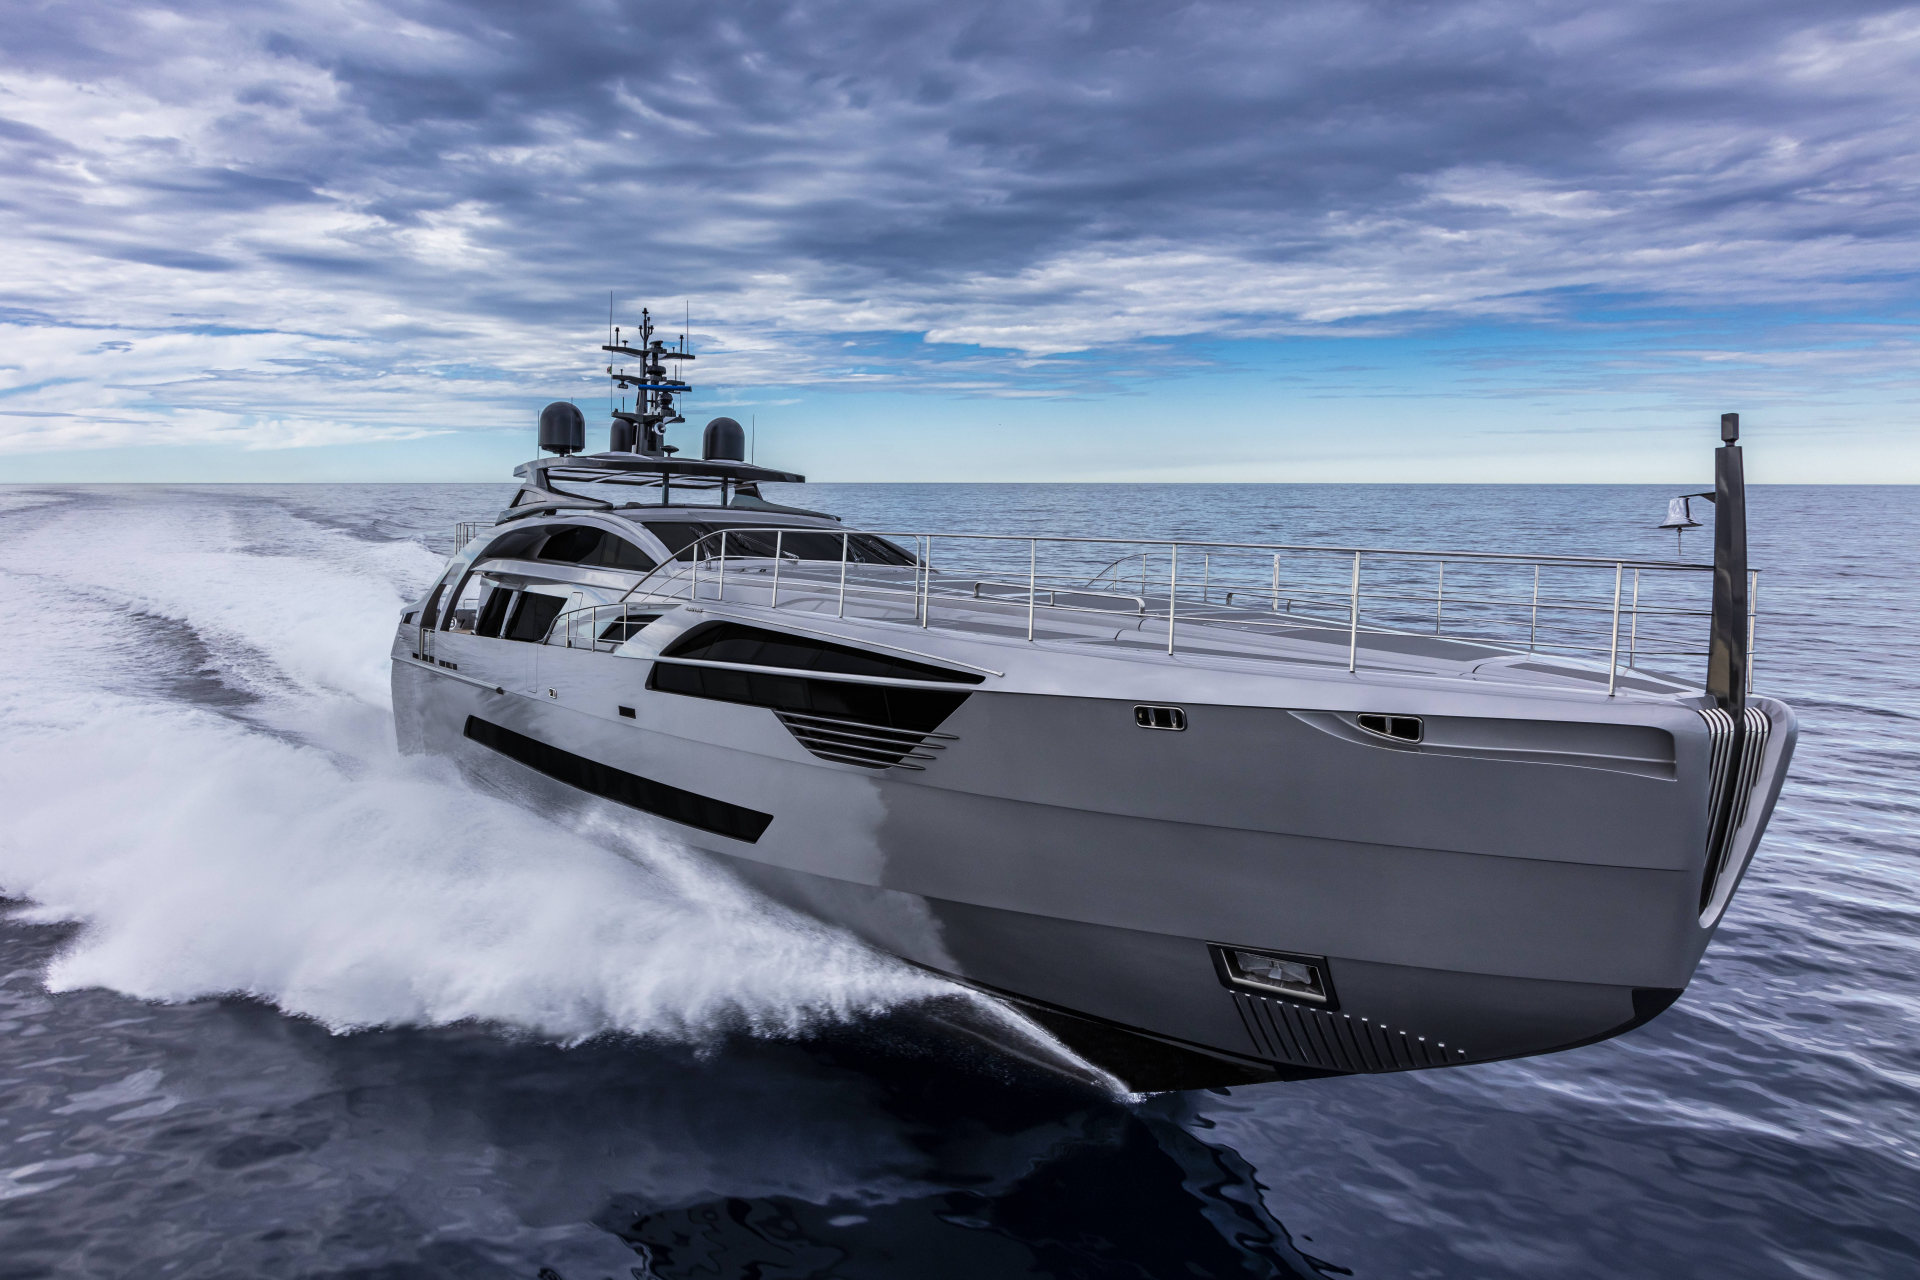 360 VR Virtual Tours of the Pershing 140